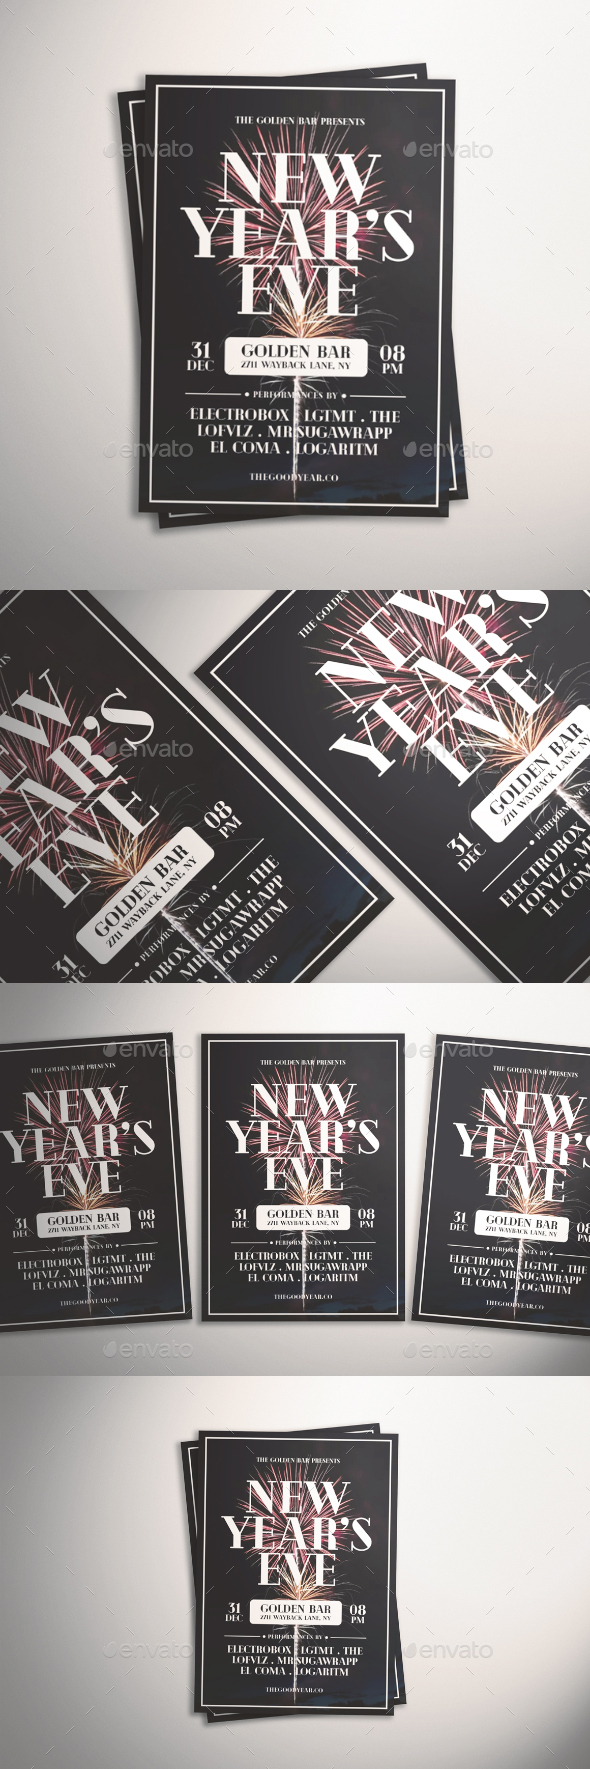 GraphicRiver New Year's Eve Flyer 21080944